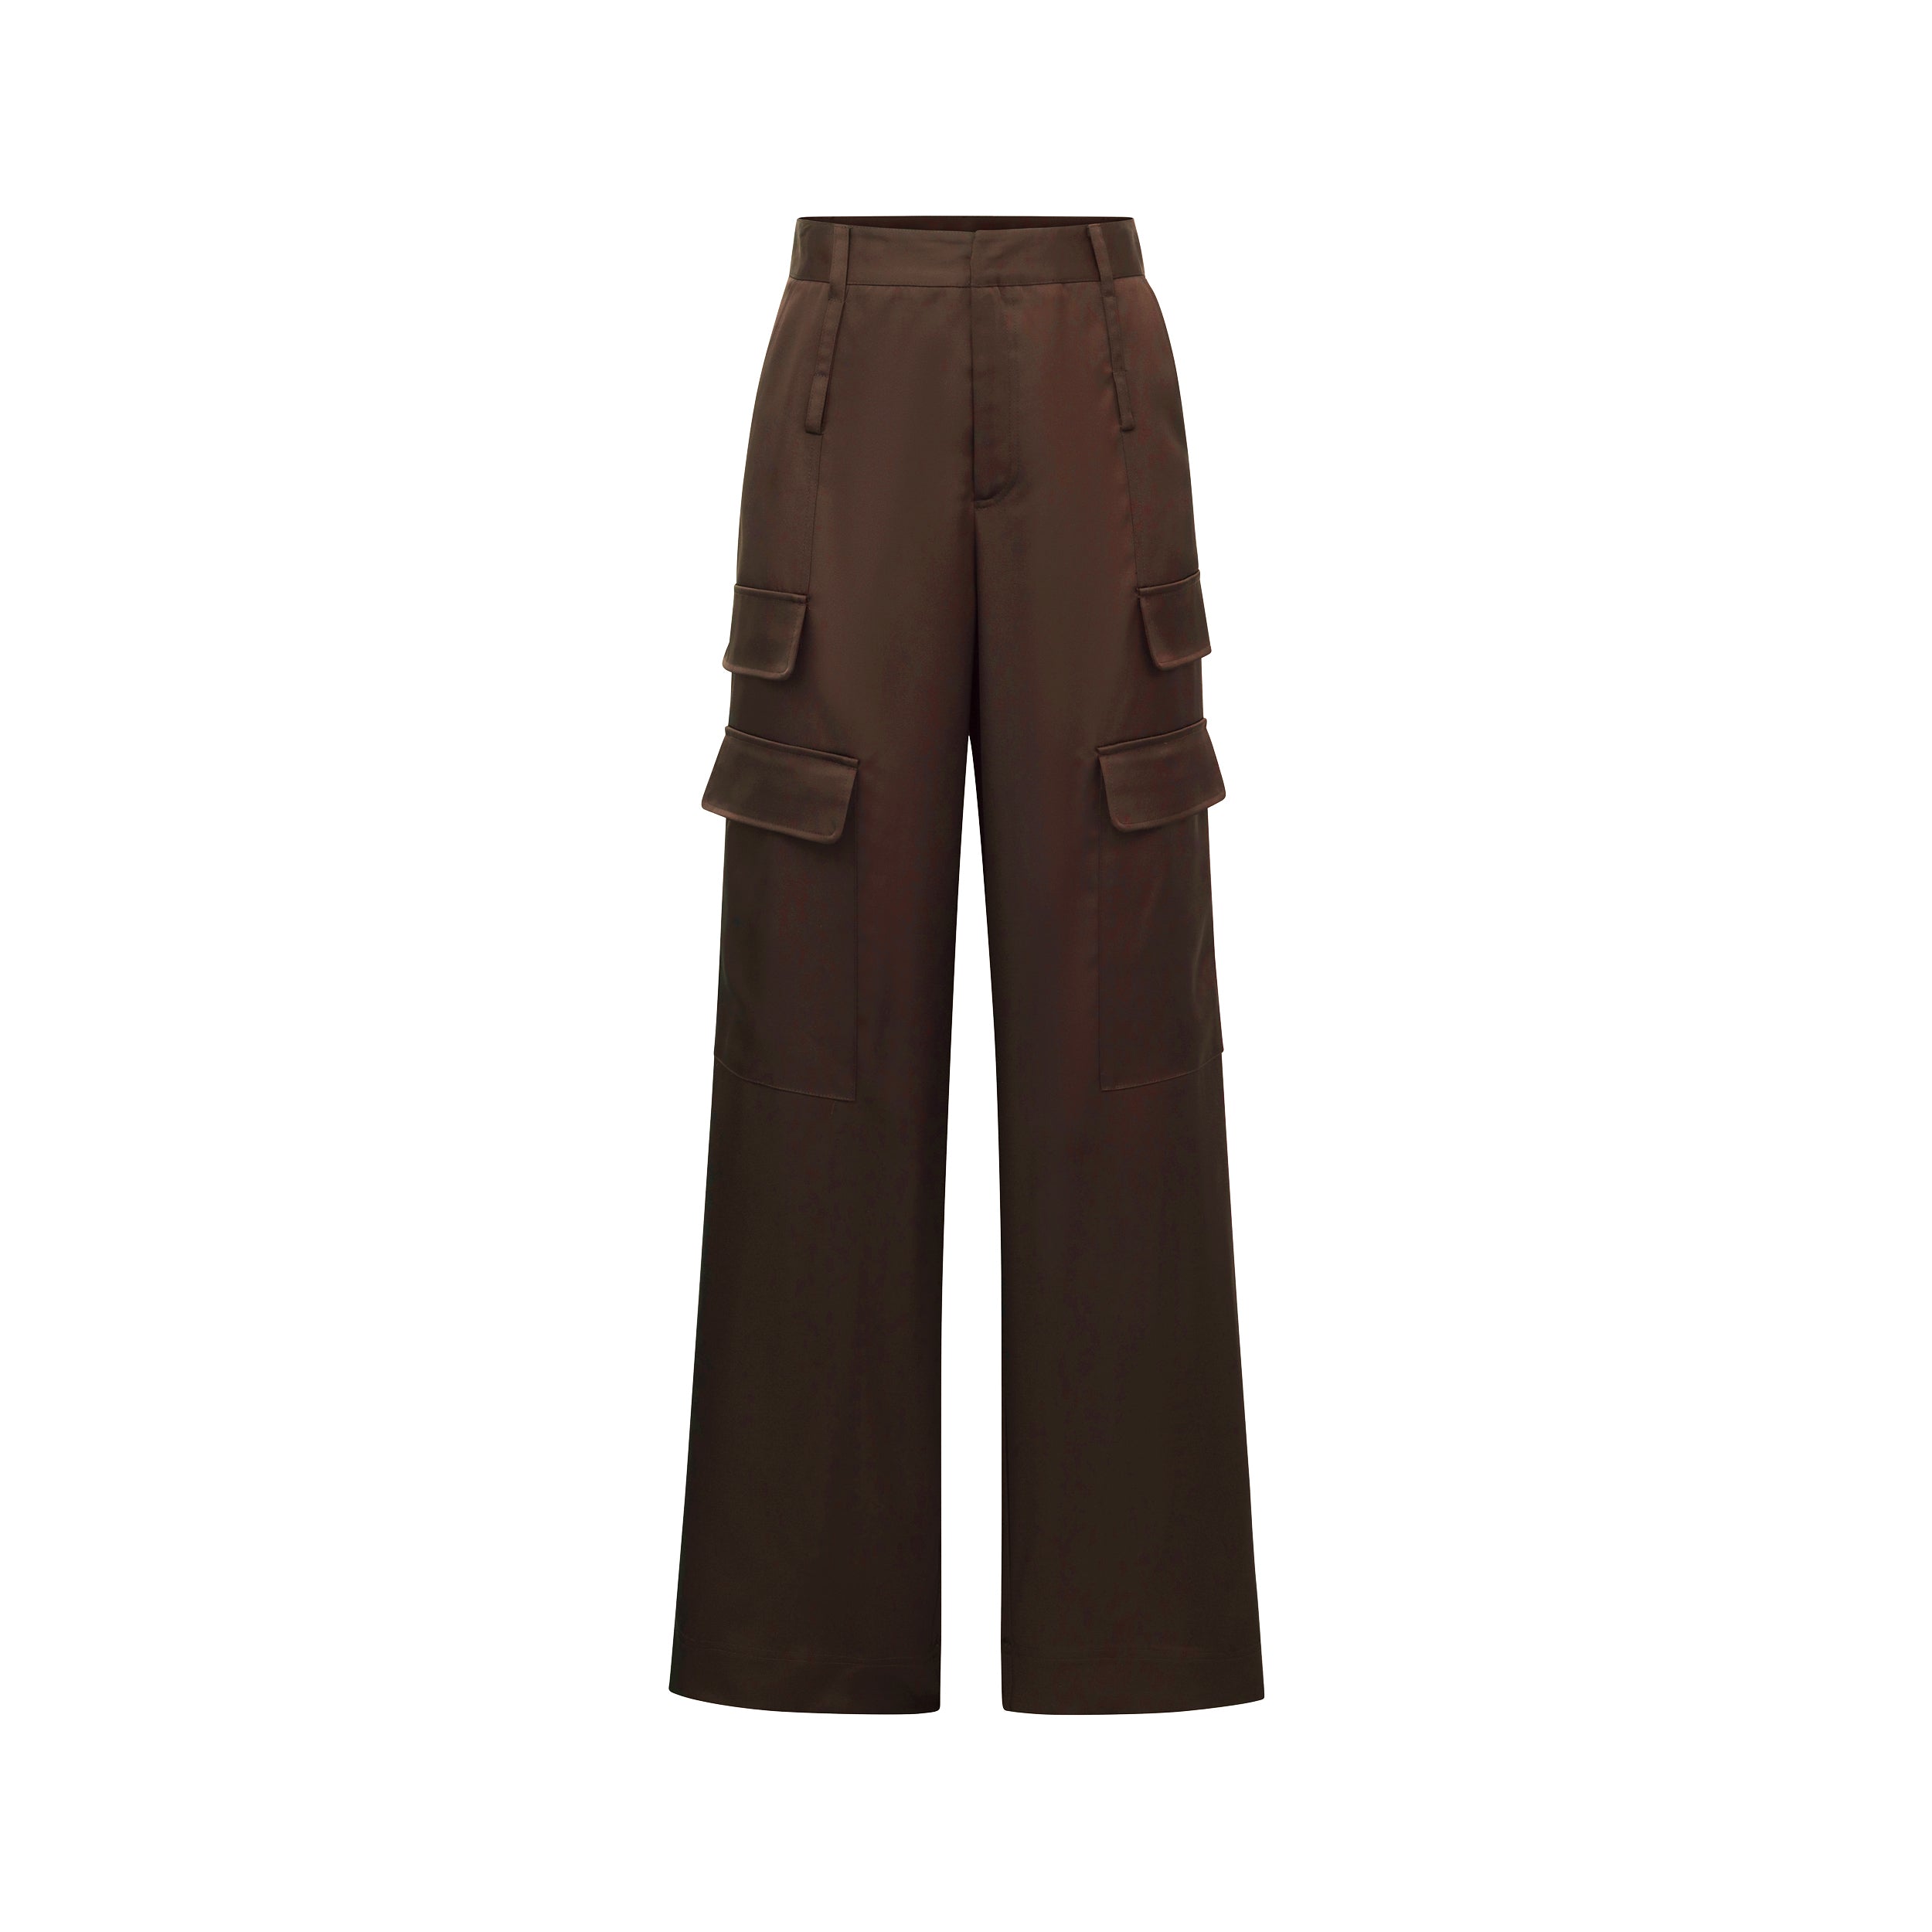 Product view of Brown Satin Milan Pant features Mid-rise with side pockets and cargo detail. Luxurious and structured satin-like fabric. 